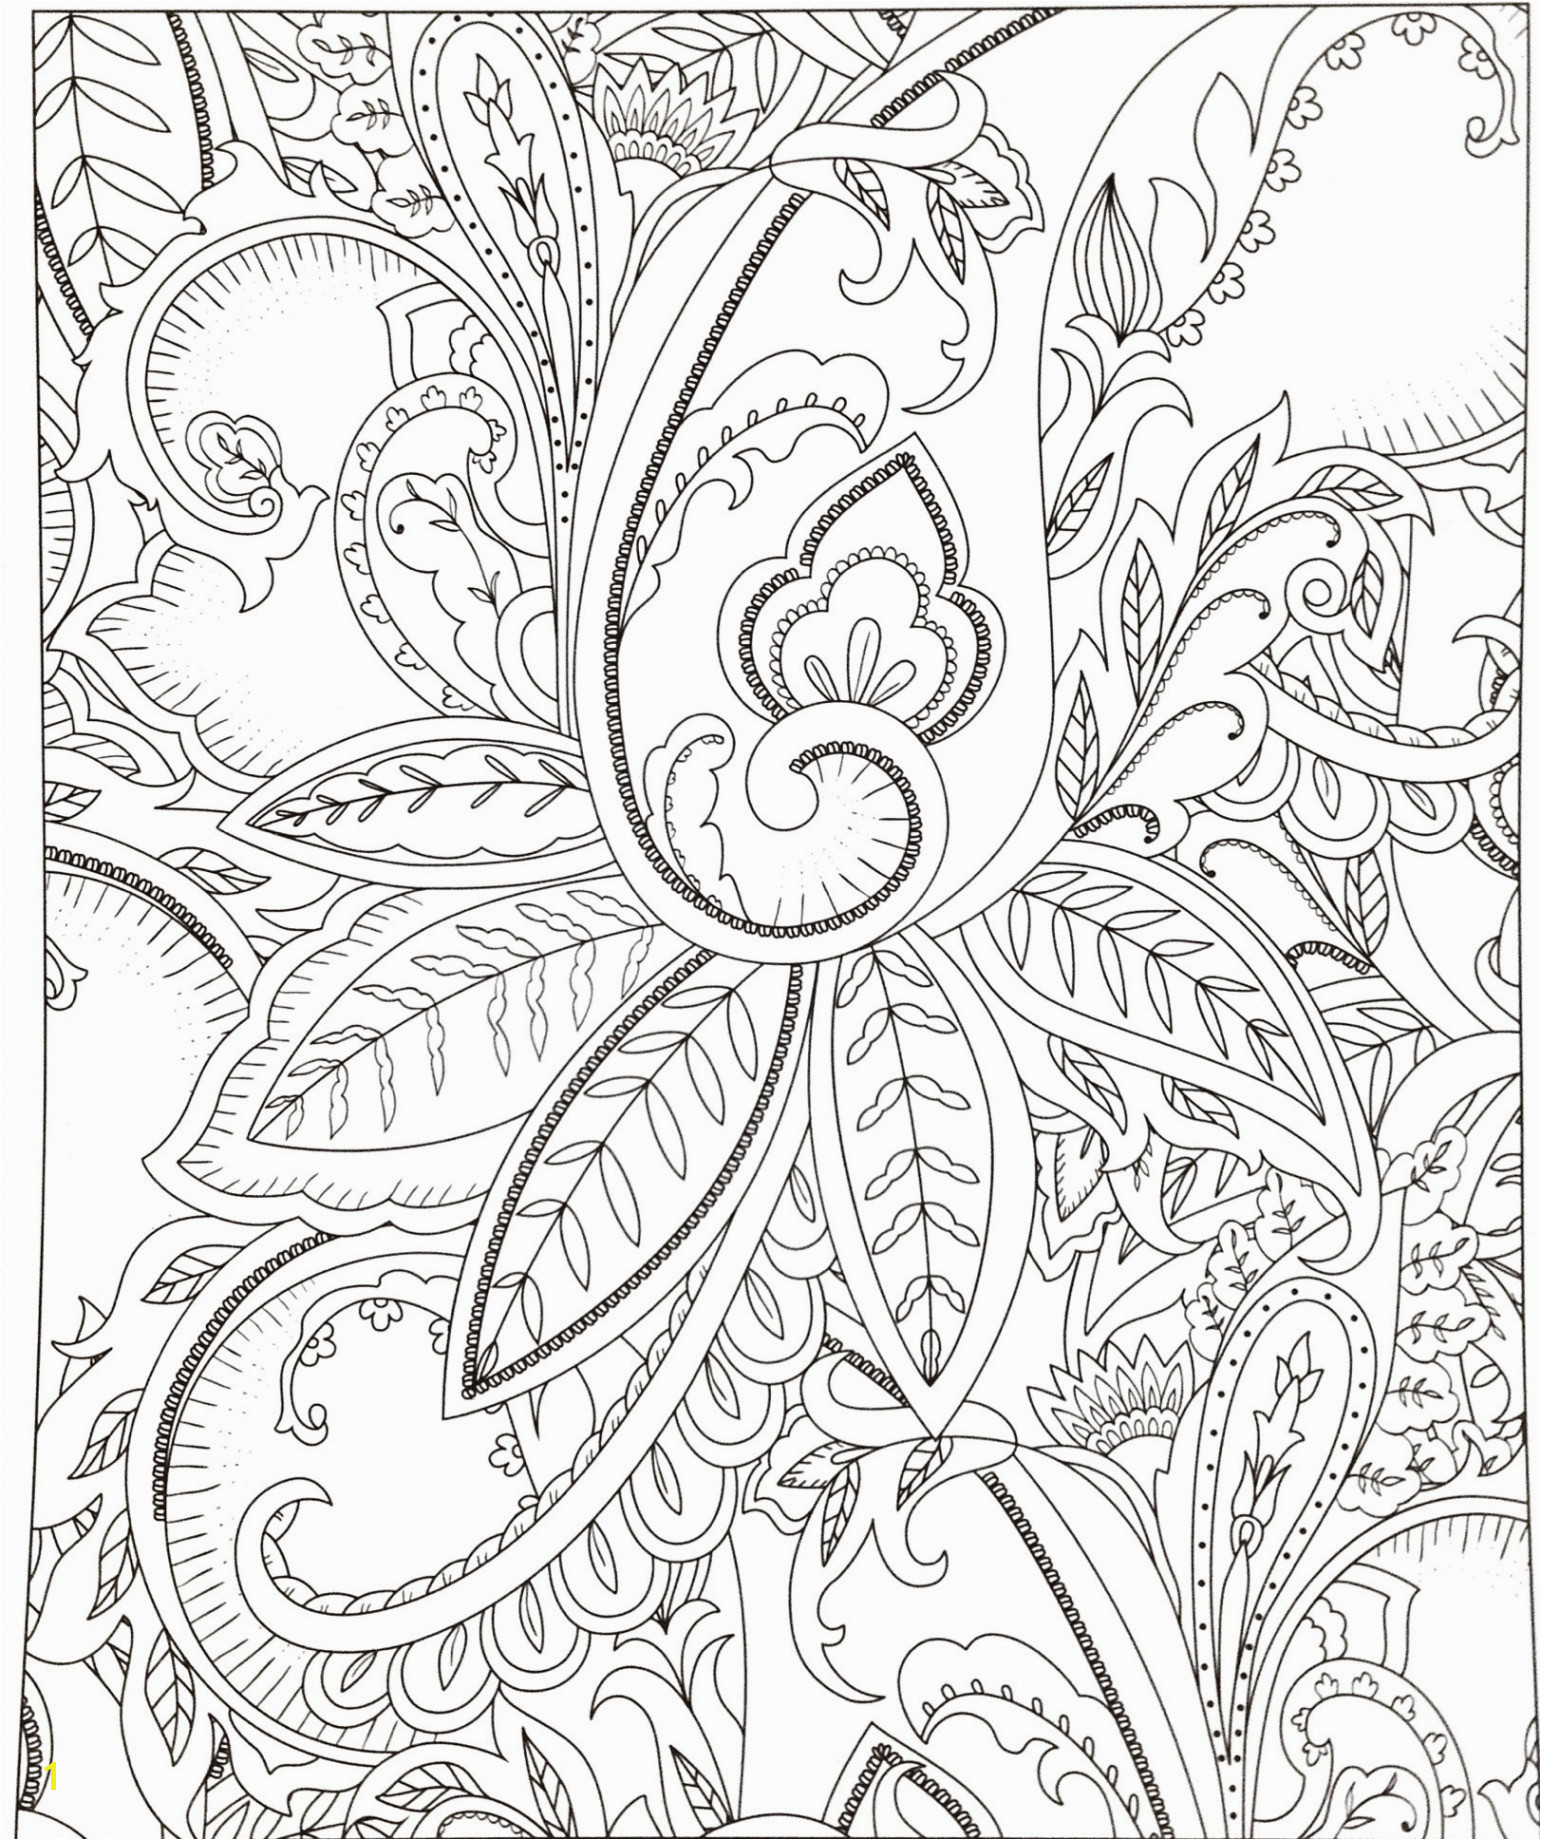 Christmas Coloring Pages Online Shopping Line for Christmas 2019 Line Christmas Coloring Pages